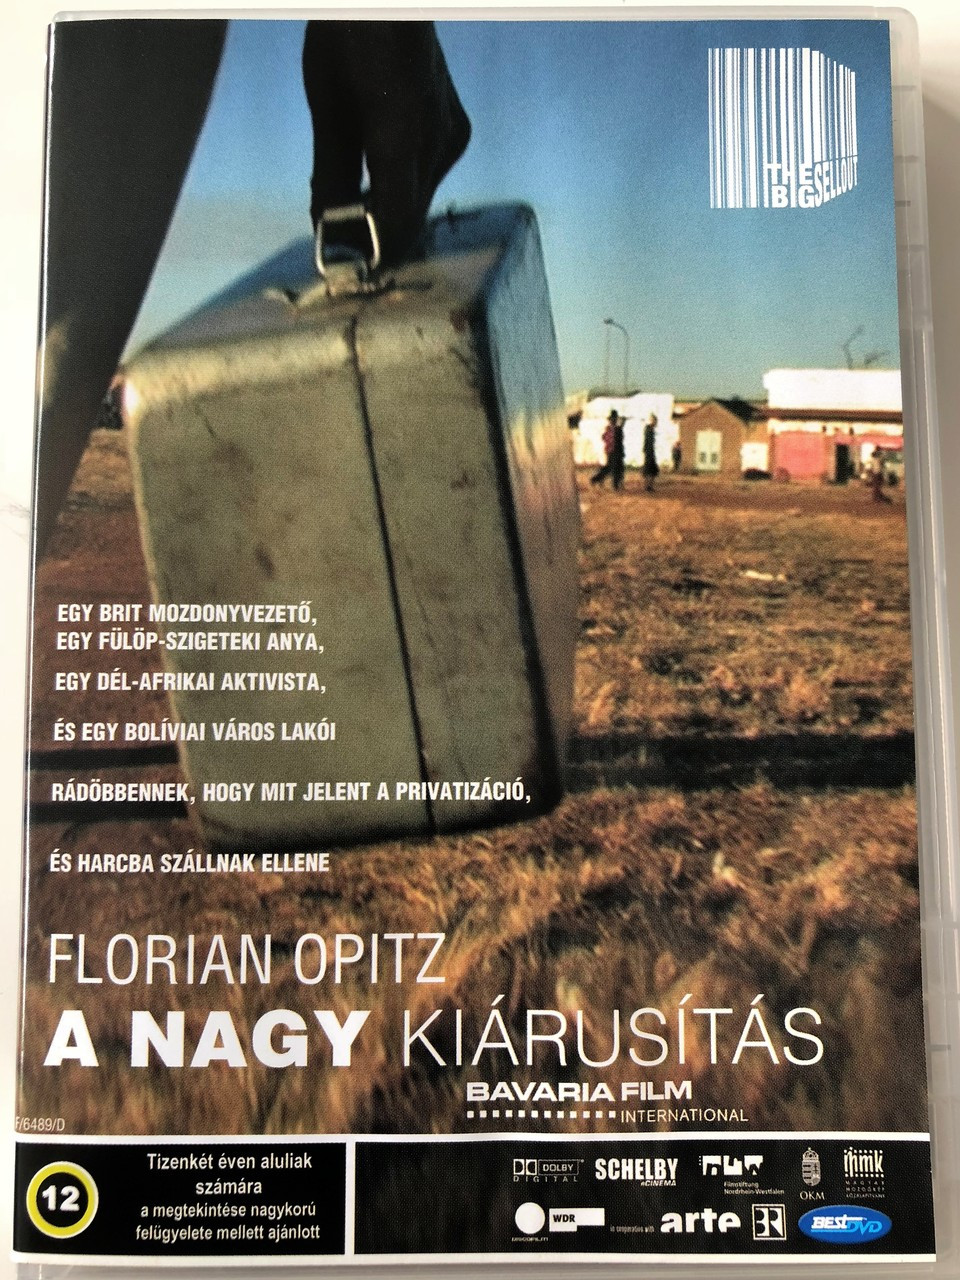 The Big Sellout (Der Grosse Ausverkauf) DVD 2006 A nagy kiárusítás /  Directed by Florian Opitz / Documentary about the cruel reality of the  privatized and globalized world - bibleinmylanguage